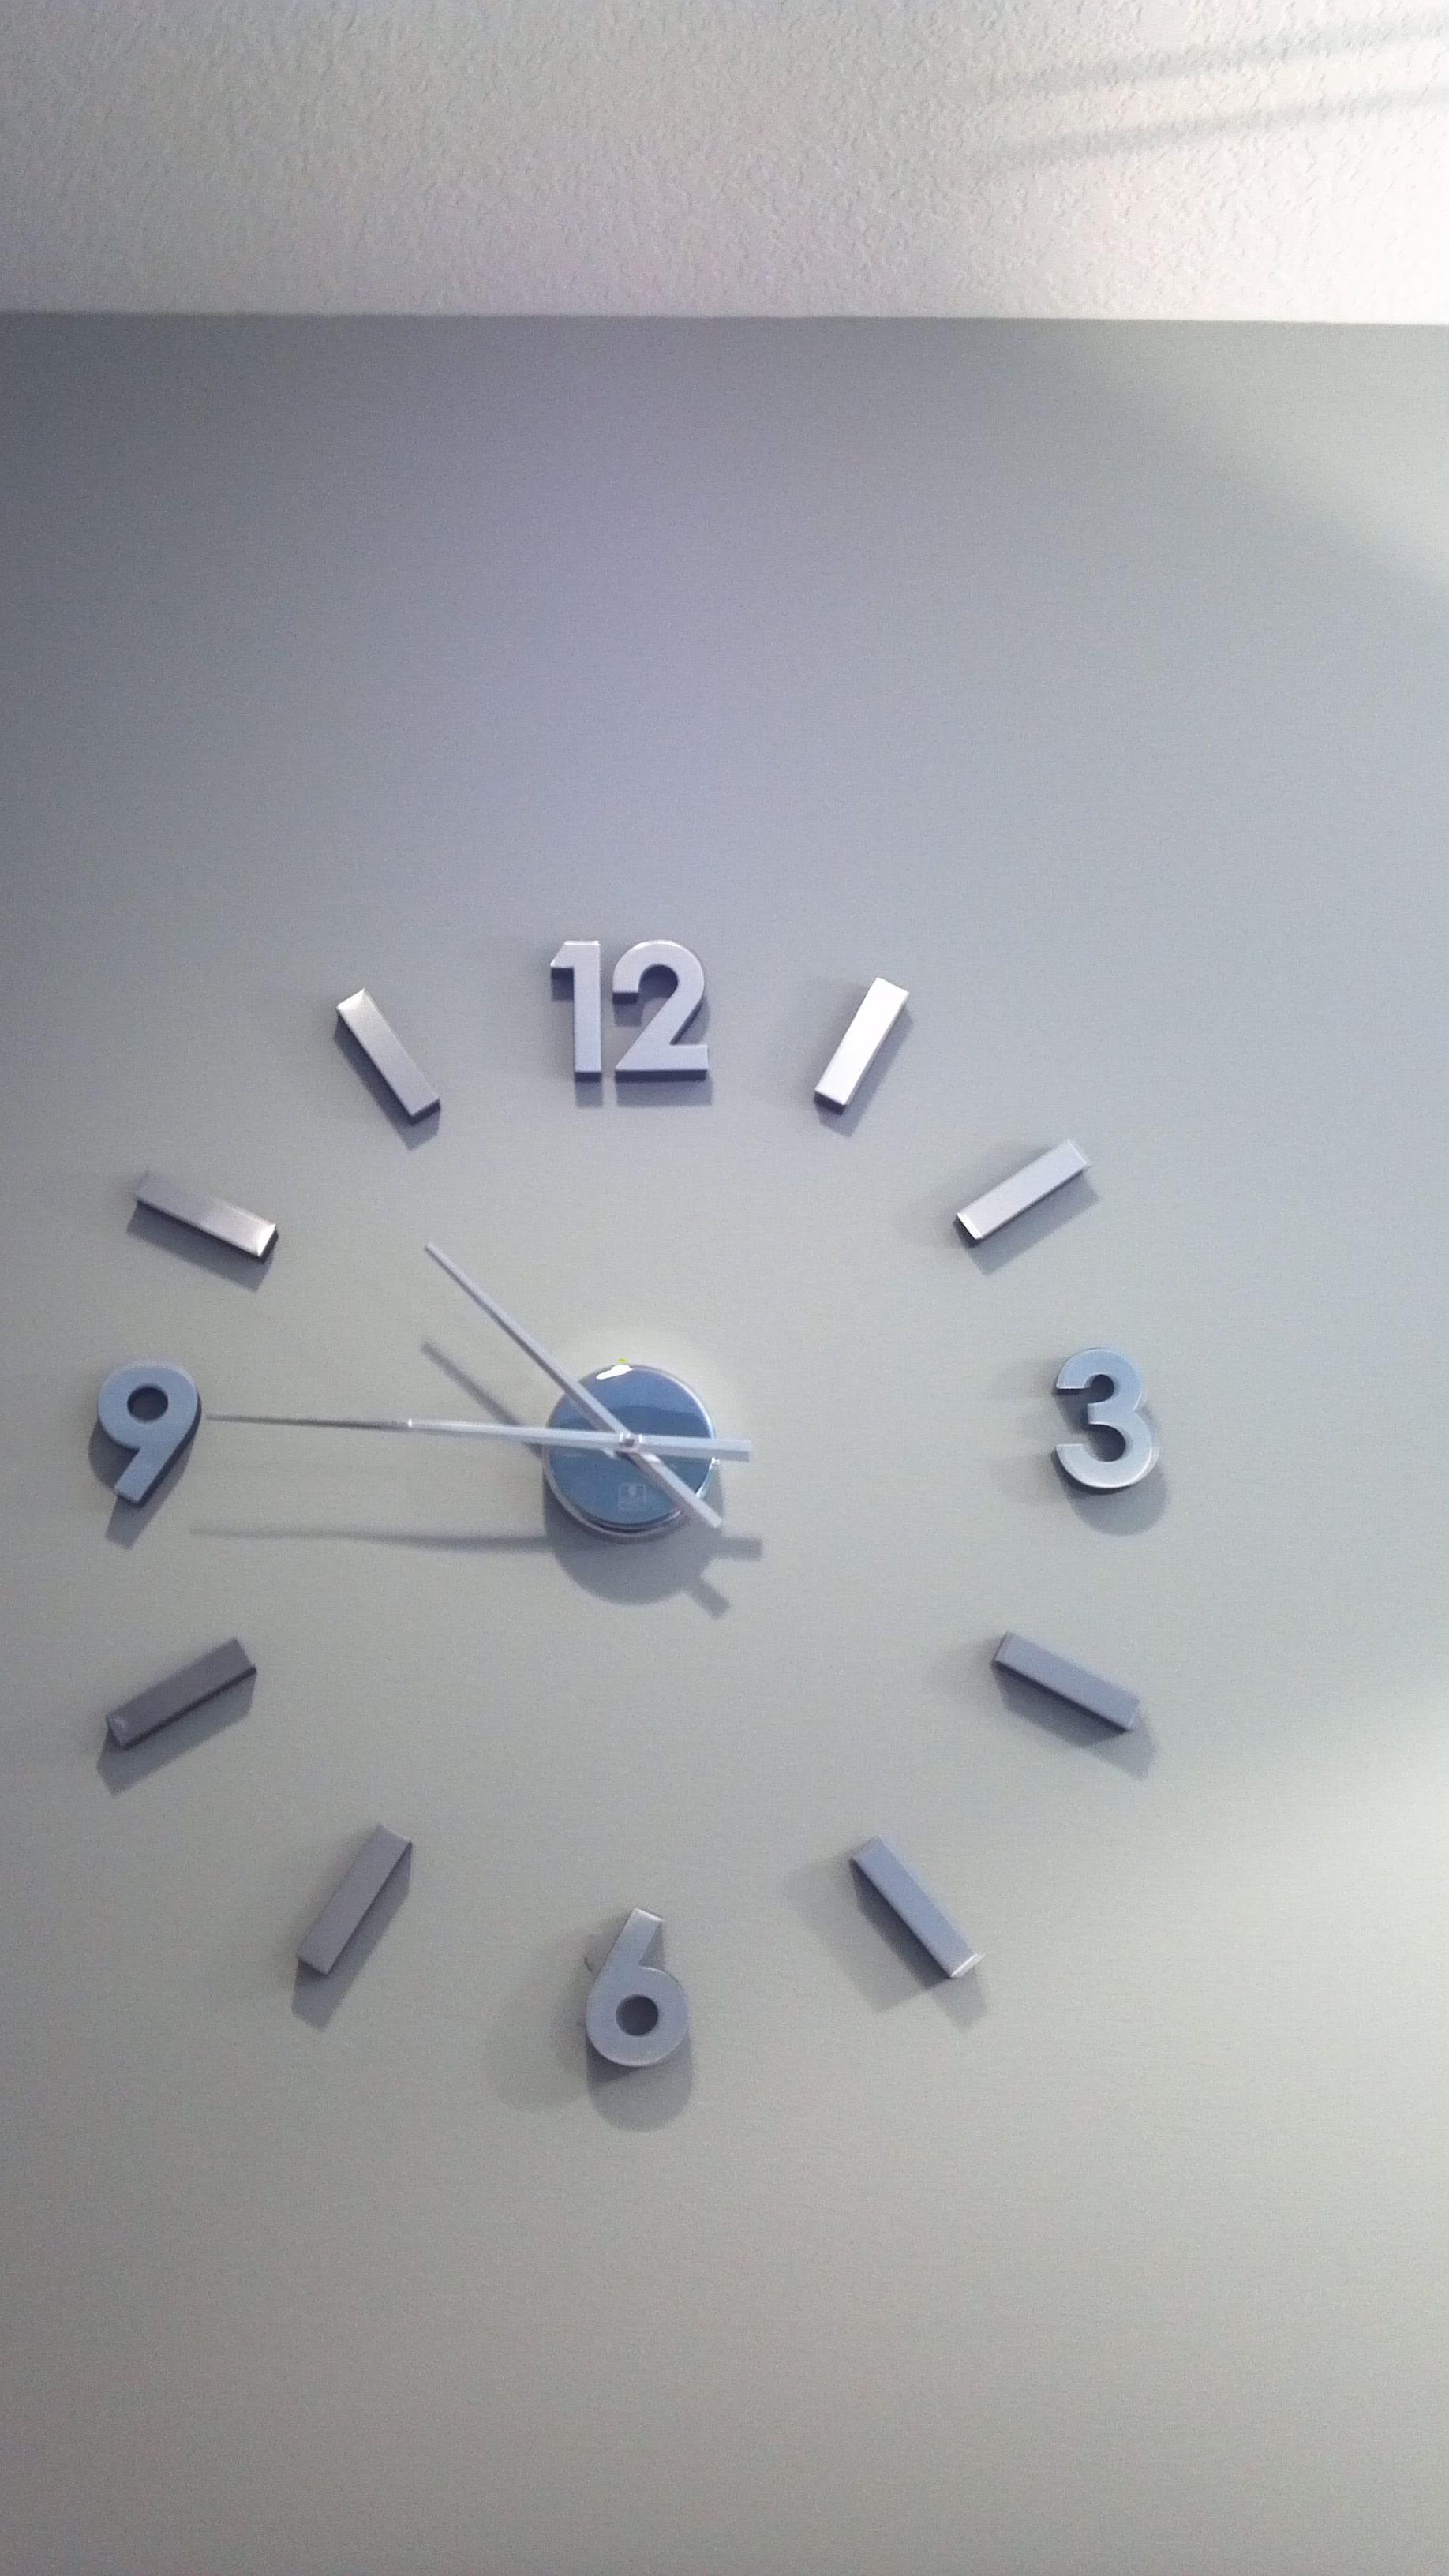 Stainless steel clock hands